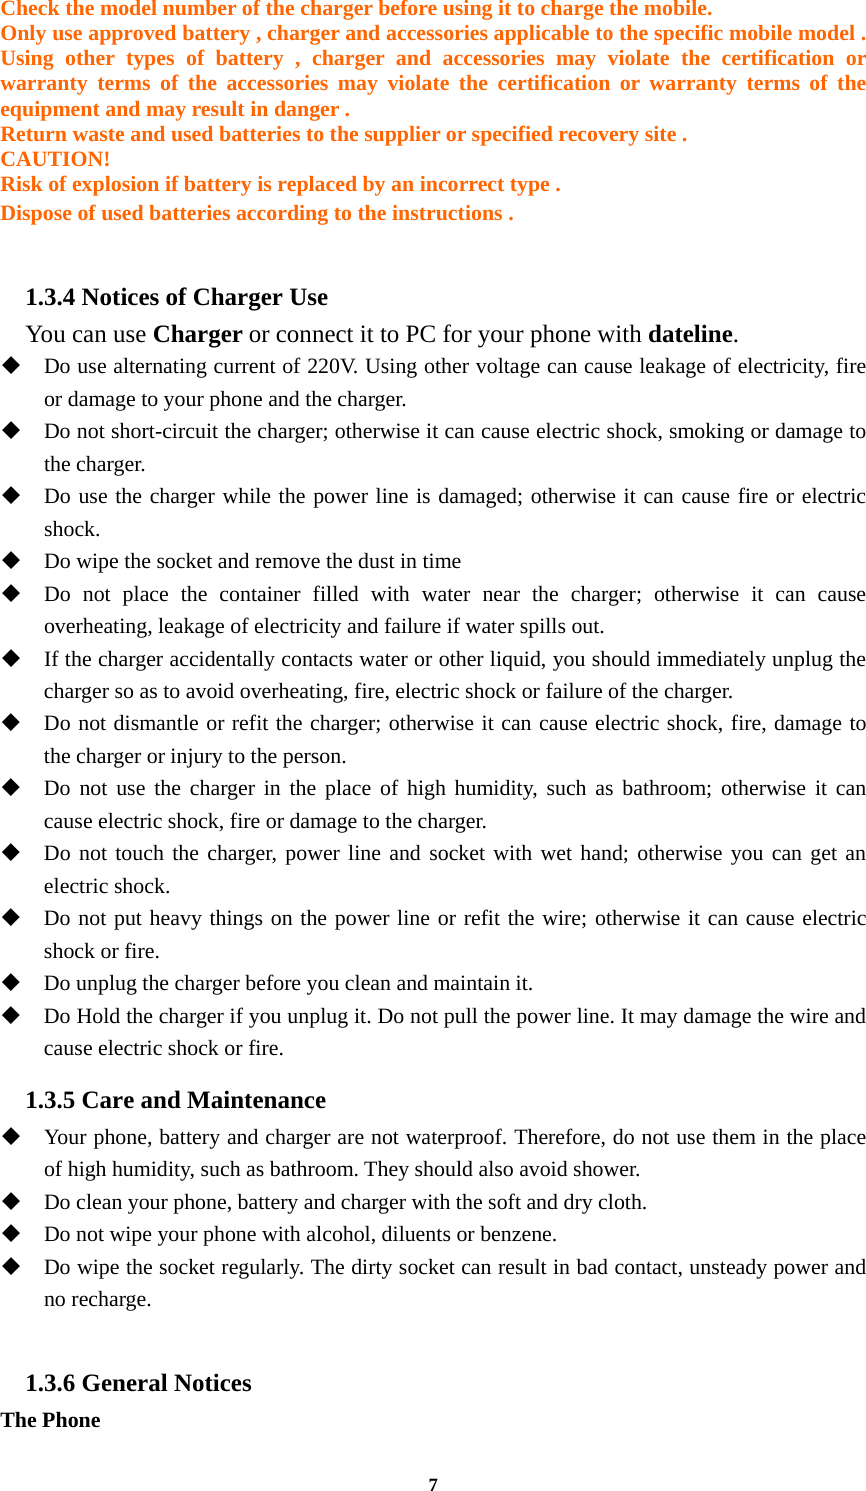 7 Check the model number of the charger before using it to charge the mobile. Only use approved battery , charger and accessories applicable to the specific mobile model . Using other types of battery , charger and accessories may violate the certification or warranty terms of the accessories may violate the certification or warranty terms of the equipment and may result in danger . Return waste and used batteries to the supplier or specified recovery site . CAUTION! Risk of explosion if battery is replaced by an incorrect type . Dispose of used batteries according to the instructions .  1.3.4 Notices of Charger Use   You can use Charger or connect it to PC for your phone with dateline.  Do use alternating current of 220V. Using other voltage can cause leakage of electricity, fire or damage to your phone and the charger.  Do not short-circuit the charger; otherwise it can cause electric shock, smoking or damage to the charger.  Do use the charger while the power line is damaged; otherwise it can cause fire or electric shock.  Do wipe the socket and remove the dust in time  Do not place the container filled with water near the charger; otherwise it can cause overheating, leakage of electricity and failure if water spills out.  If the charger accidentally contacts water or other liquid, you should immediately unplug the charger so as to avoid overheating, fire, electric shock or failure of the charger.  Do not dismantle or refit the charger; otherwise it can cause electric shock, fire, damage to the charger or injury to the person.  Do not use the charger in the place of high humidity, such as bathroom; otherwise it can cause electric shock, fire or damage to the charger.  Do not touch the charger, power line and socket with wet hand; otherwise you can get an electric shock.  Do not put heavy things on the power line or refit the wire; otherwise it can cause electric shock or fire.  Do unplug the charger before you clean and maintain it.  Do Hold the charger if you unplug it. Do not pull the power line. It may damage the wire and cause electric shock or fire. 1.3.5 Care and Maintenance  Your phone, battery and charger are not waterproof. Therefore, do not use them in the place of high humidity, such as bathroom. They should also avoid shower.  Do clean your phone, battery and charger with the soft and dry cloth.  Do not wipe your phone with alcohol, diluents or benzene.  Do wipe the socket regularly. The dirty socket can result in bad contact, unsteady power and no recharge.  1.3.6 General Notices The Phone 